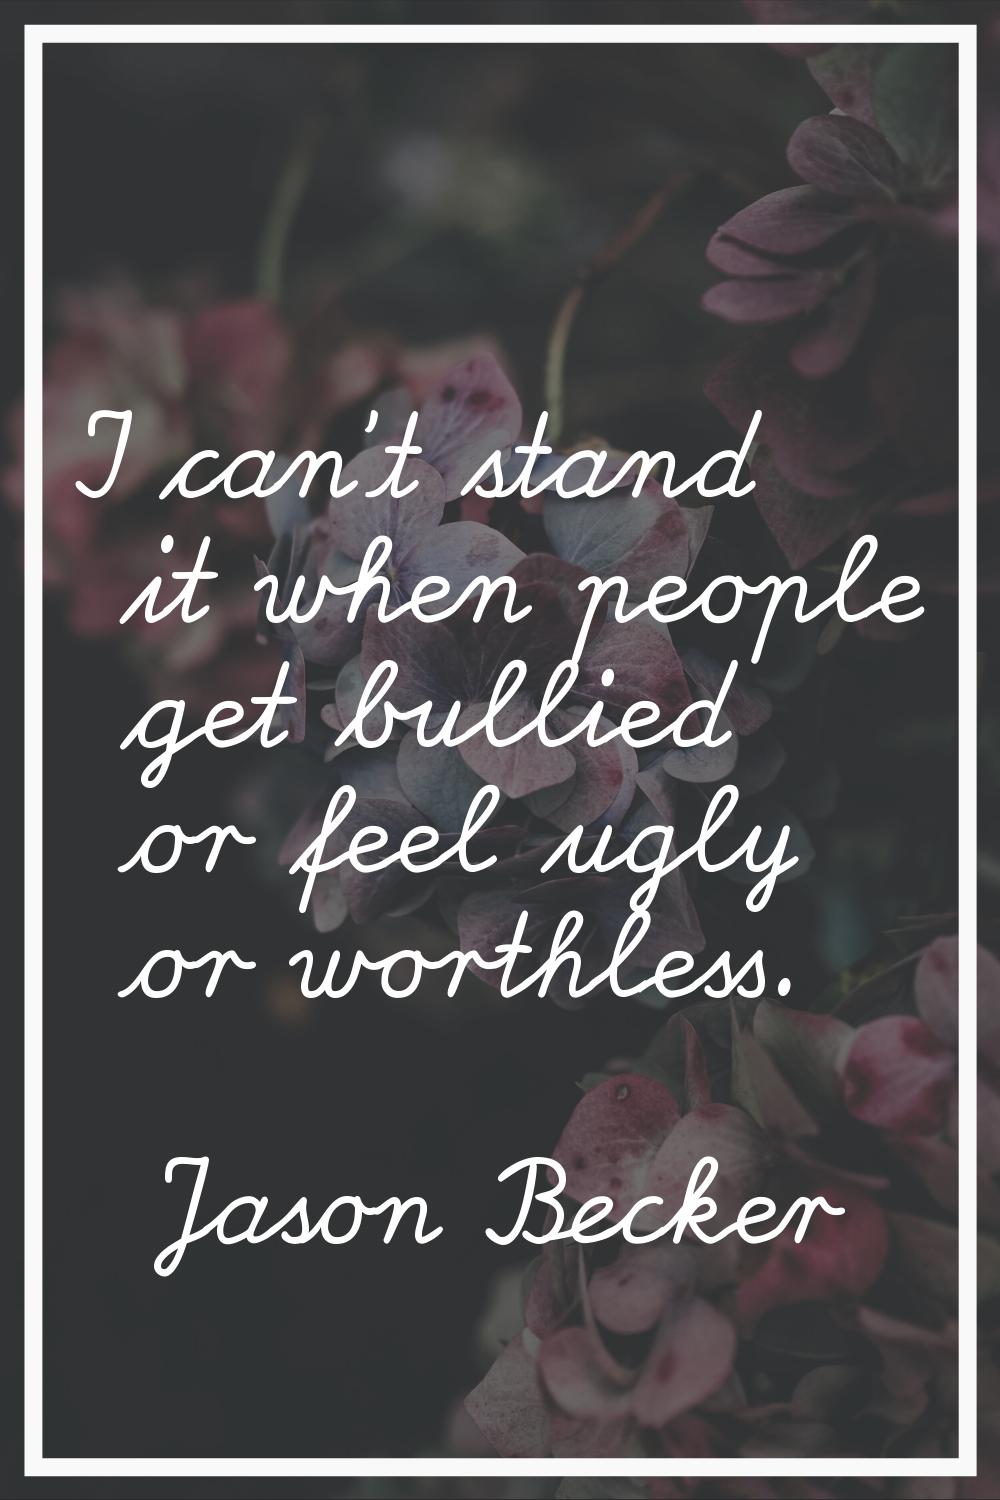 I can't stand it when people get bullied or feel ugly or worthless.